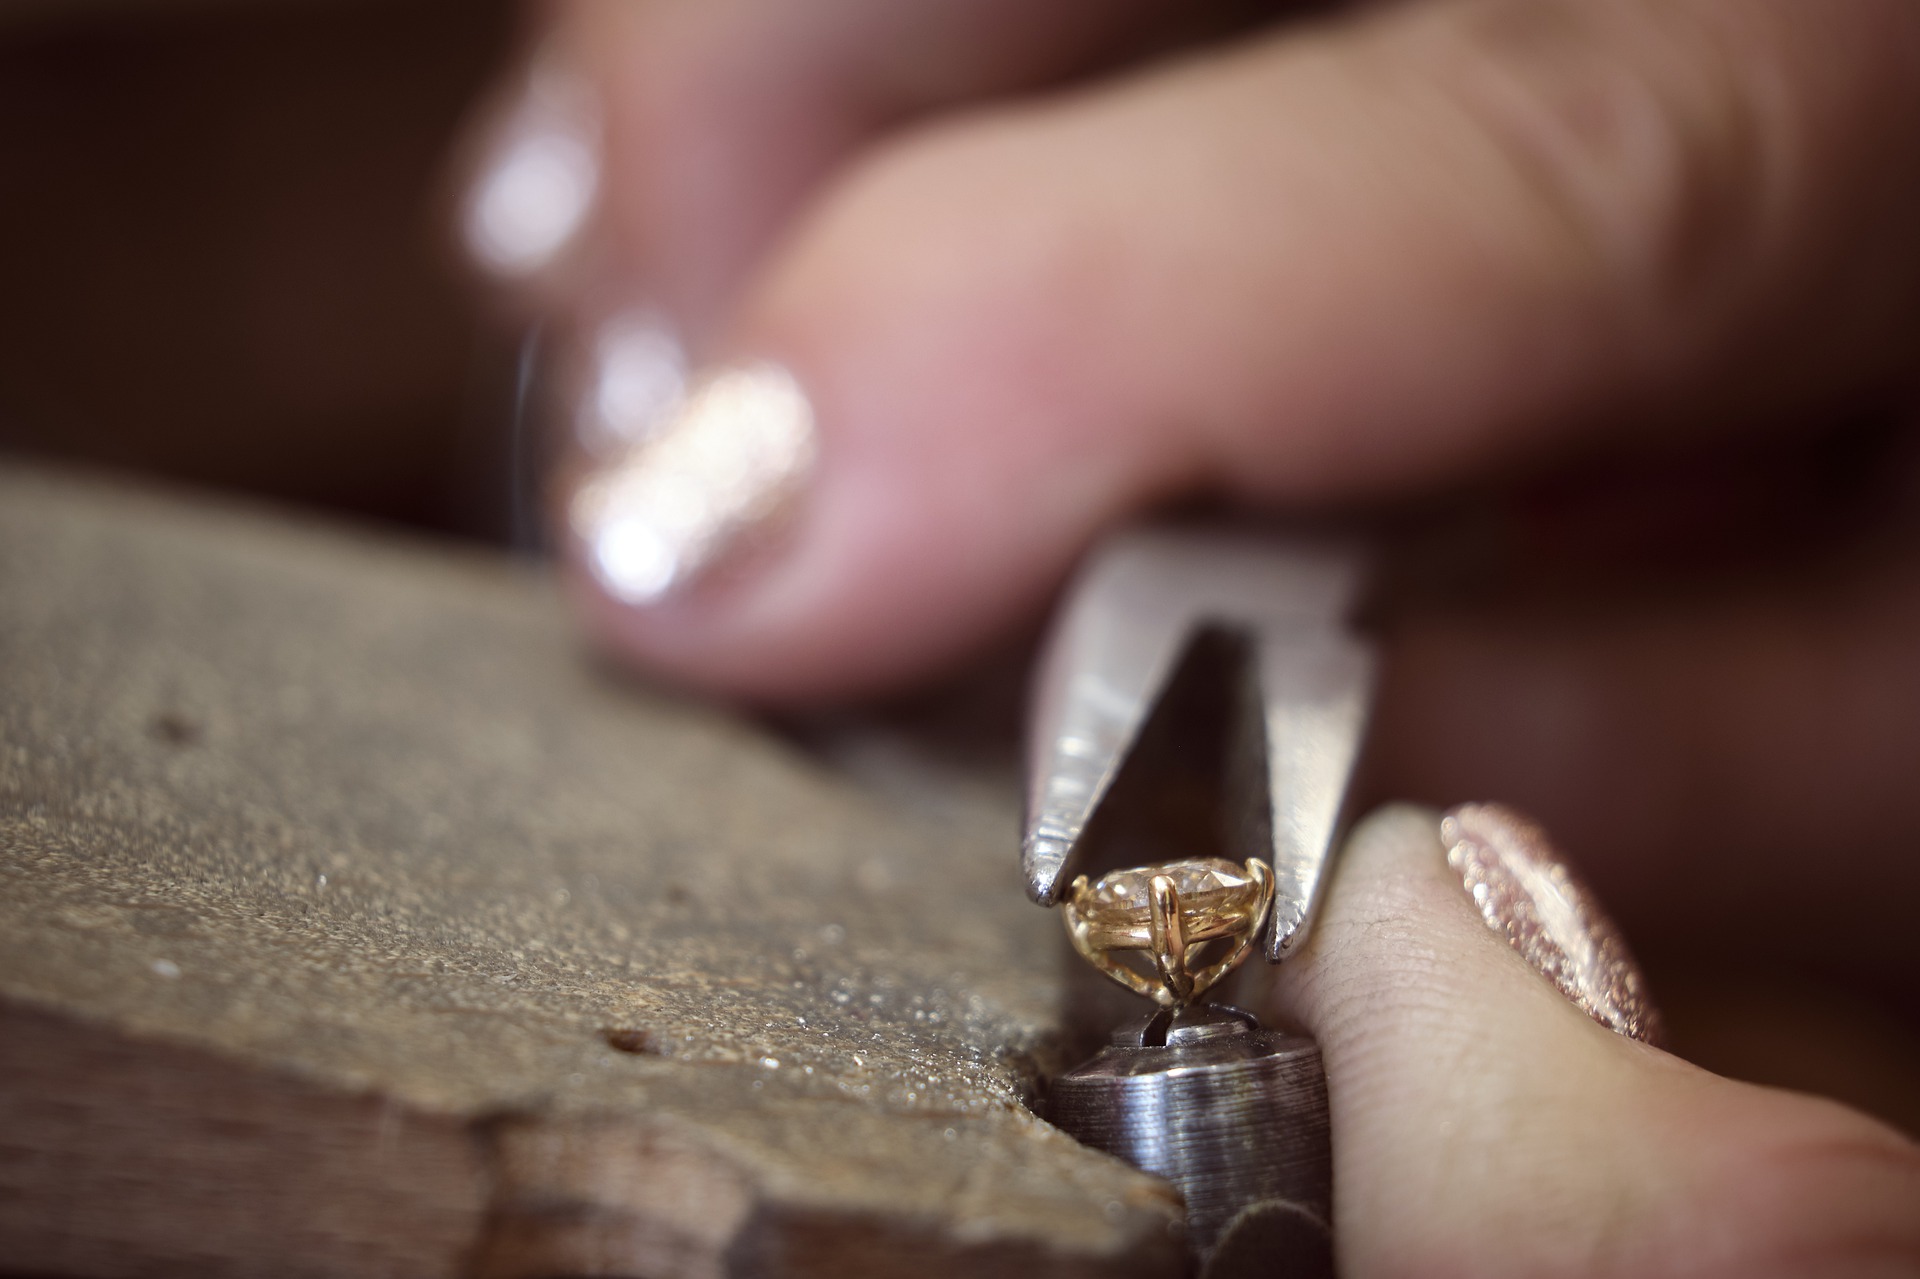 Our Services, In-House Jewelry Repair